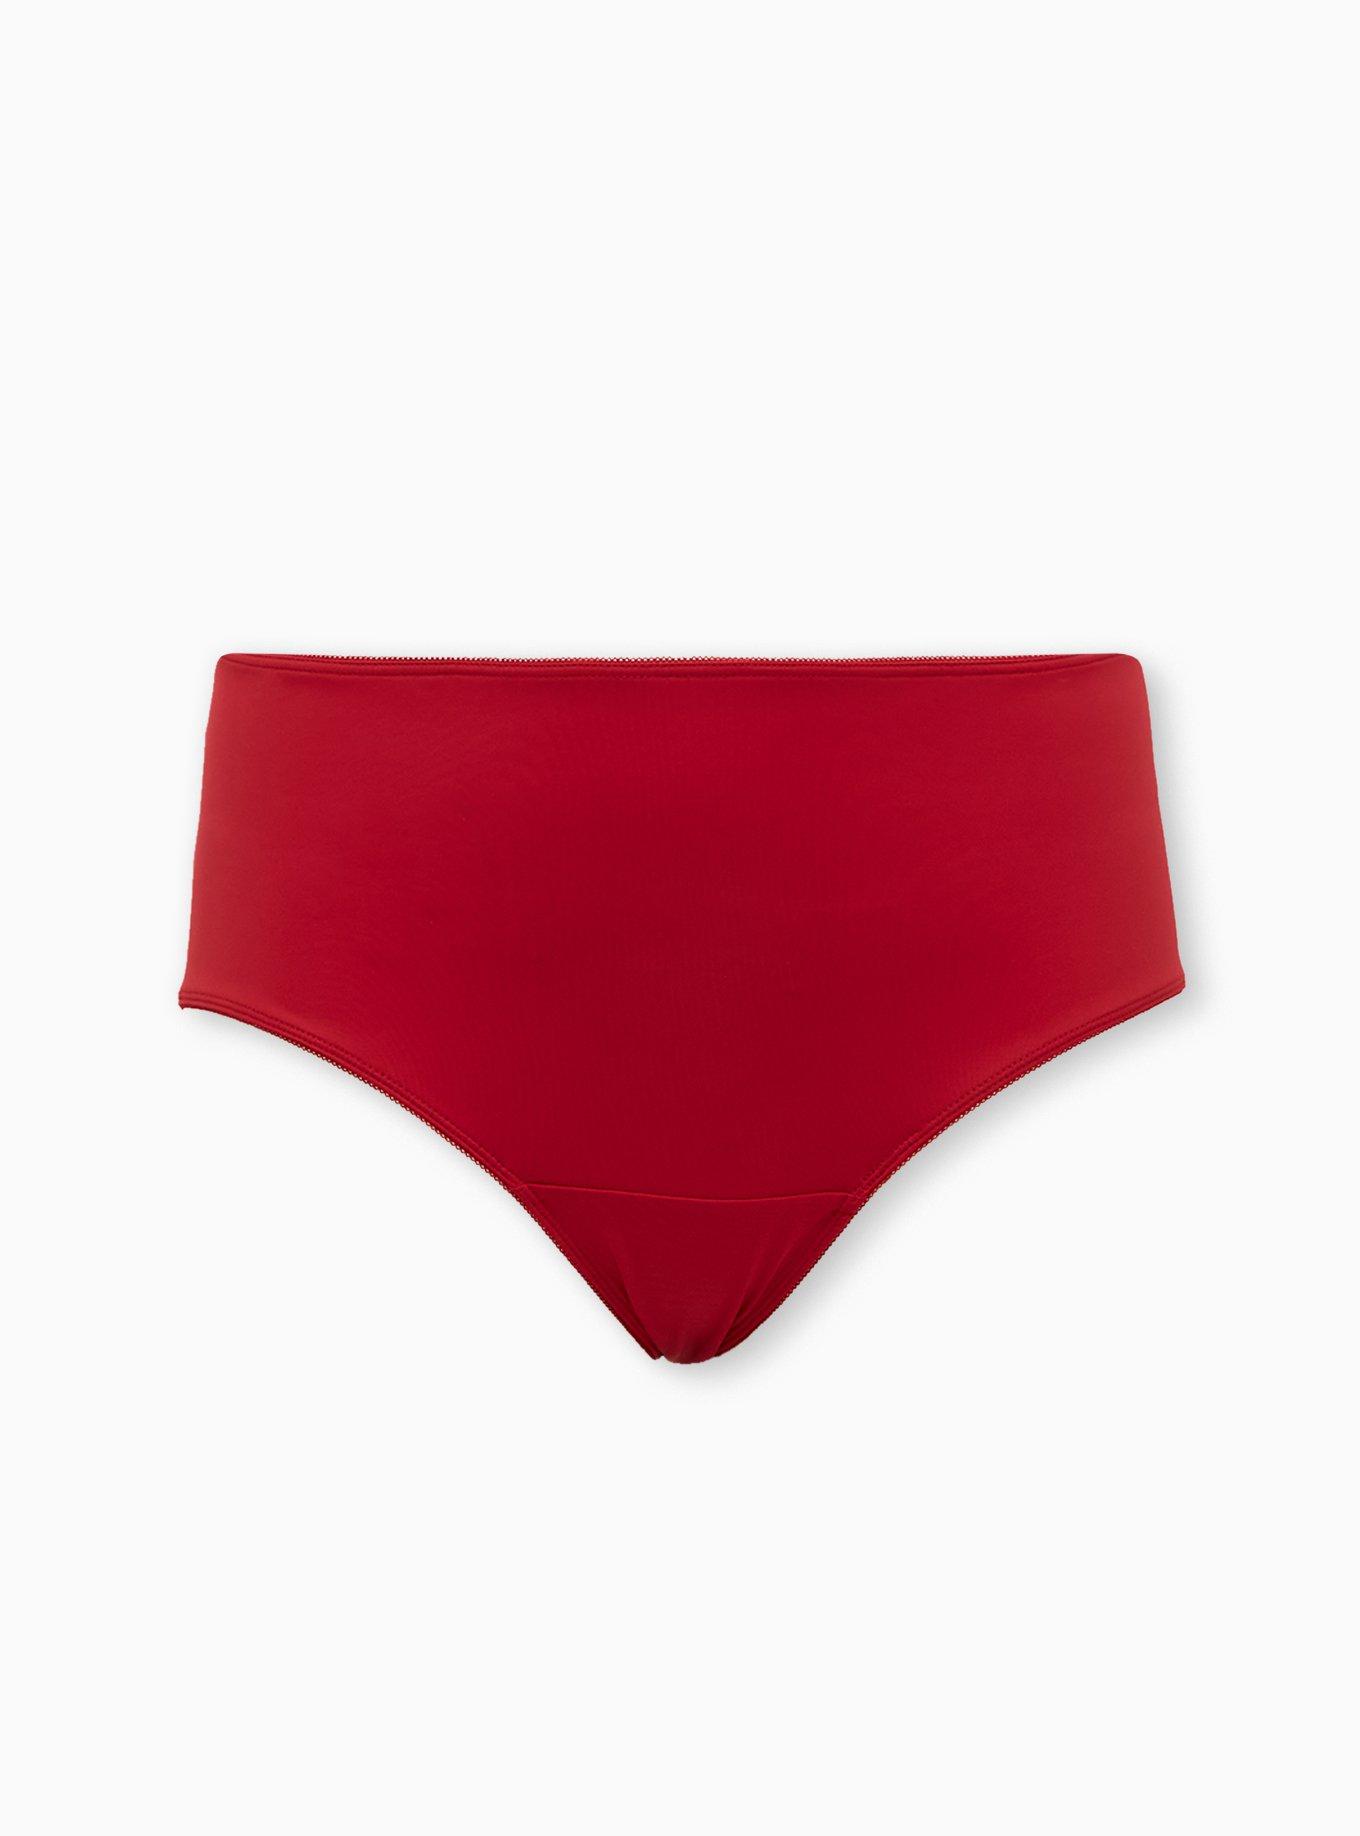 CLZOUD Cheeky Plus Size Panties Red Polyester Womens Underwear